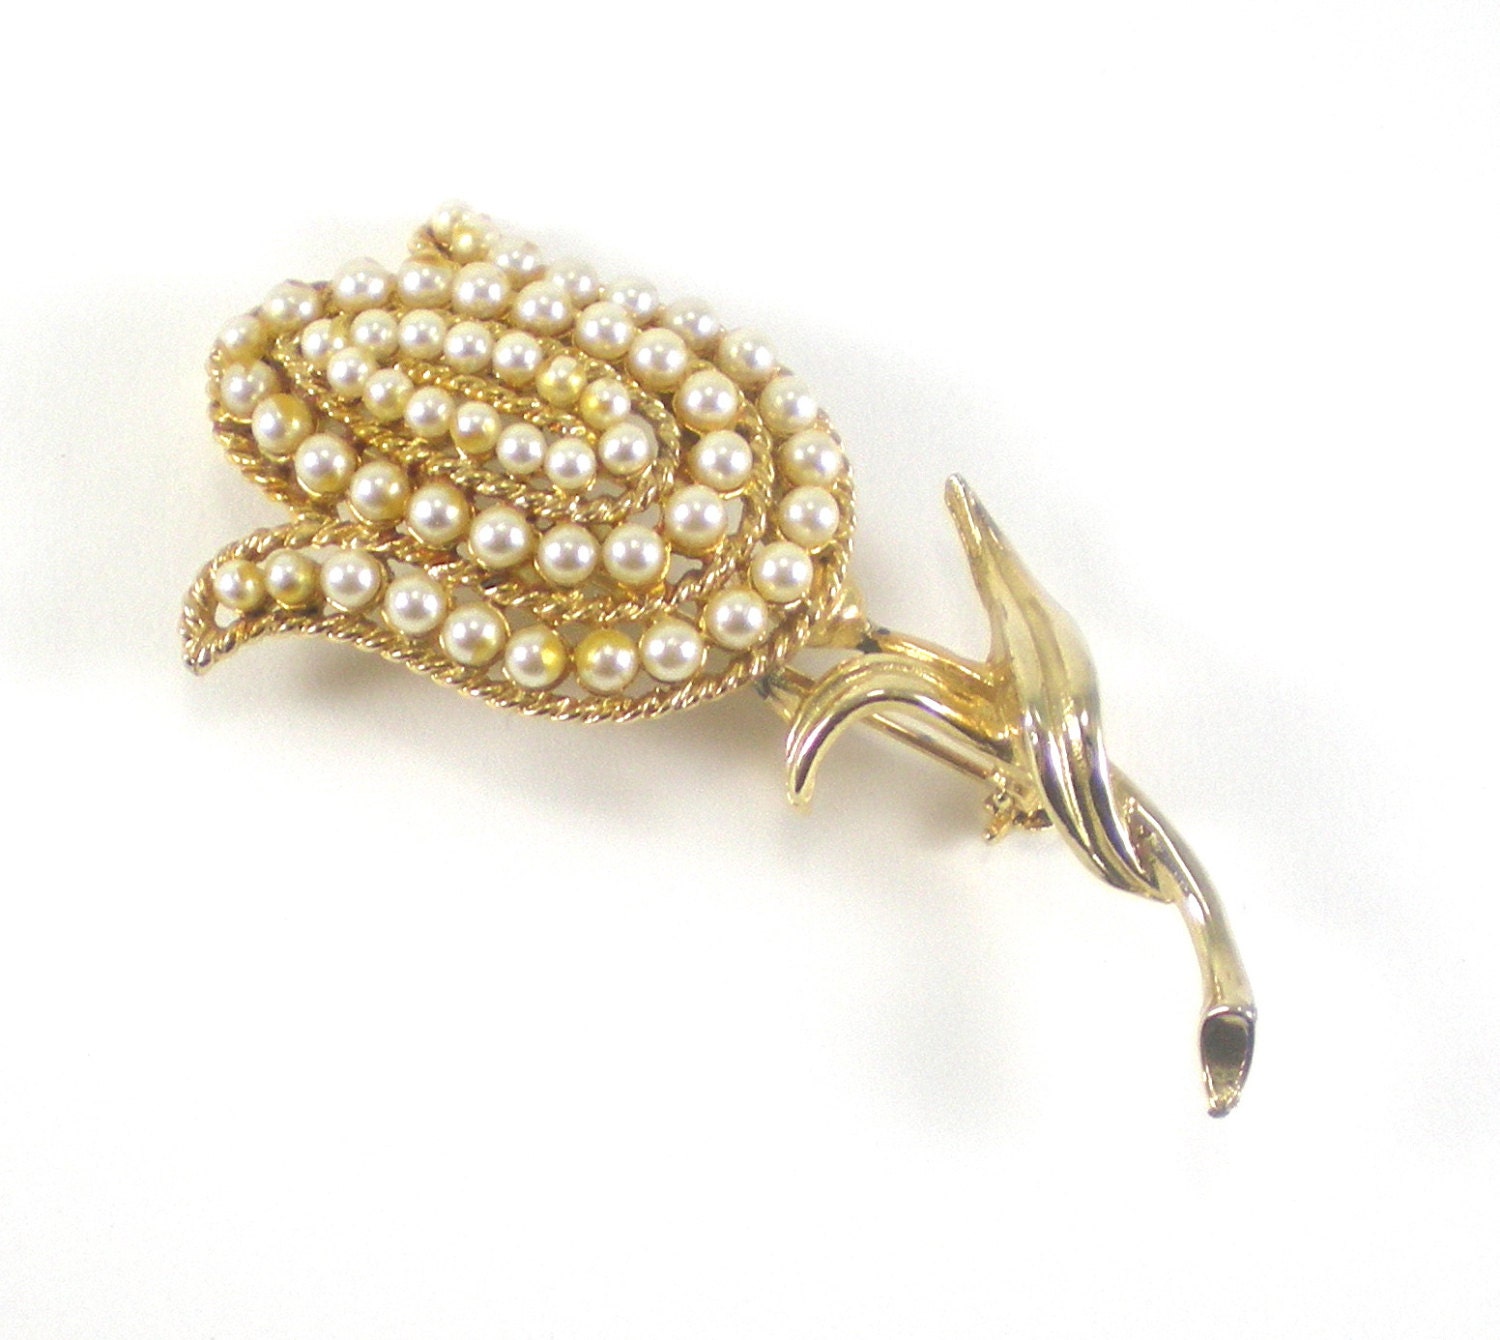 Tulip Flower Brooch Pin Gold Faux Pearls Floral by paleorama